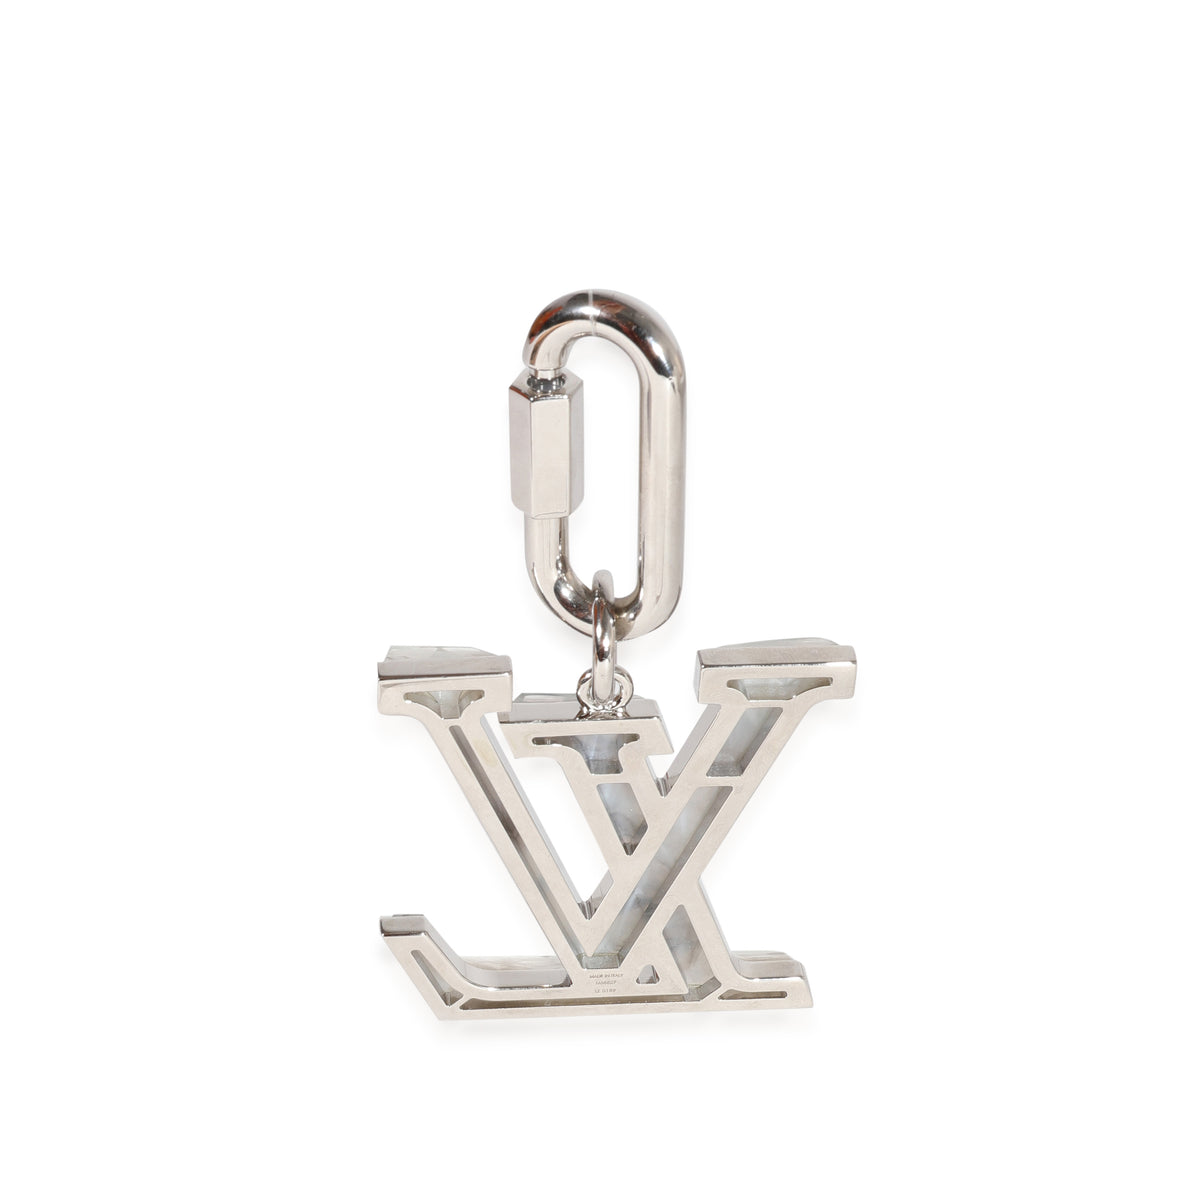 Louis Vuitton - Authenticated Monogram Bag Charm - Metal Gold for Women, Very Good Condition